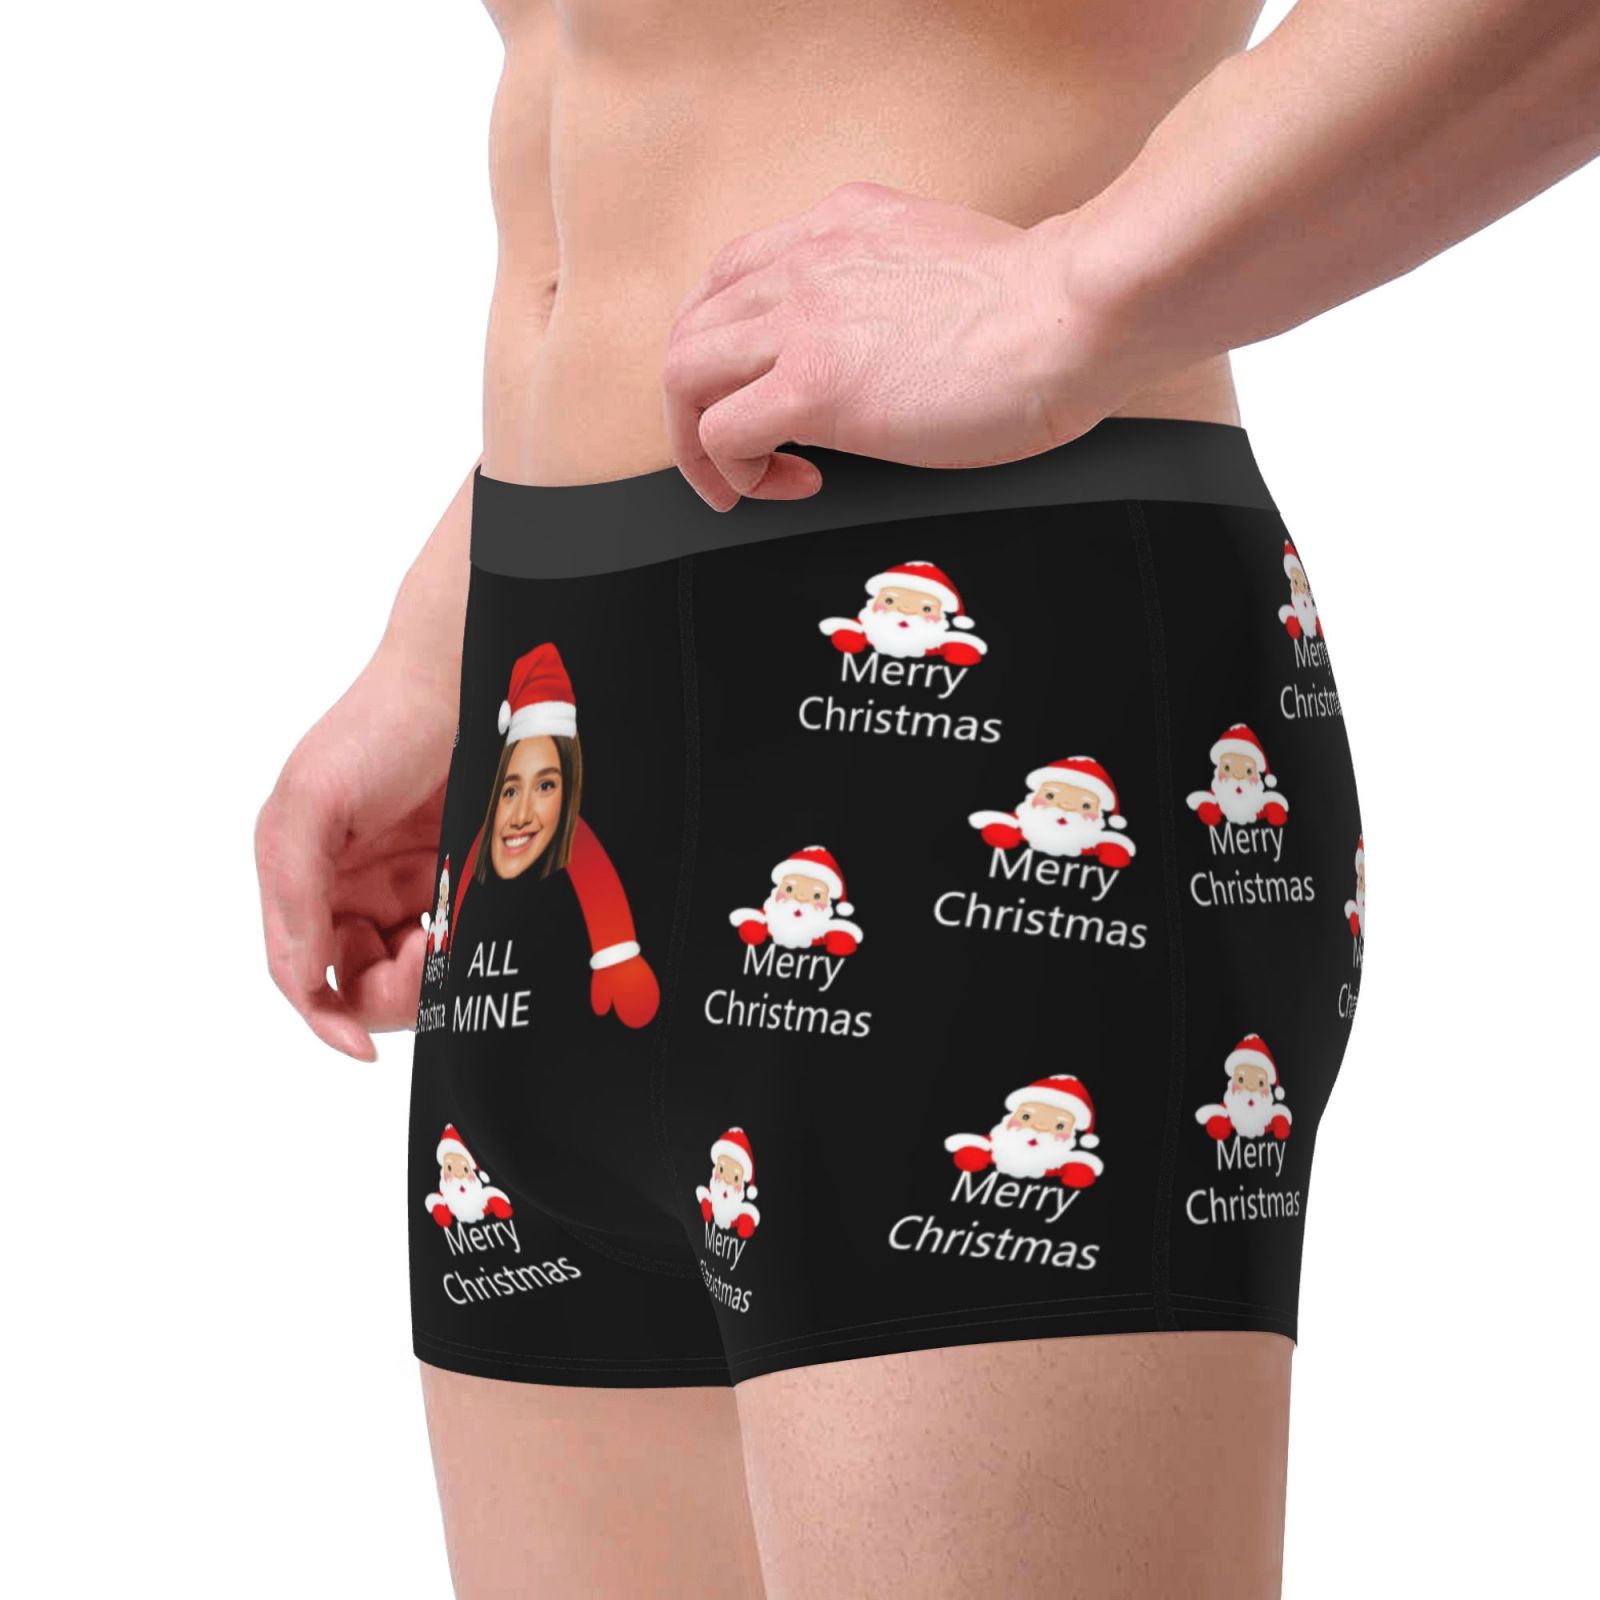 Custom Girlfriend Face Boxers Shorts All Mine - Personalized Christmas Photo Underwear